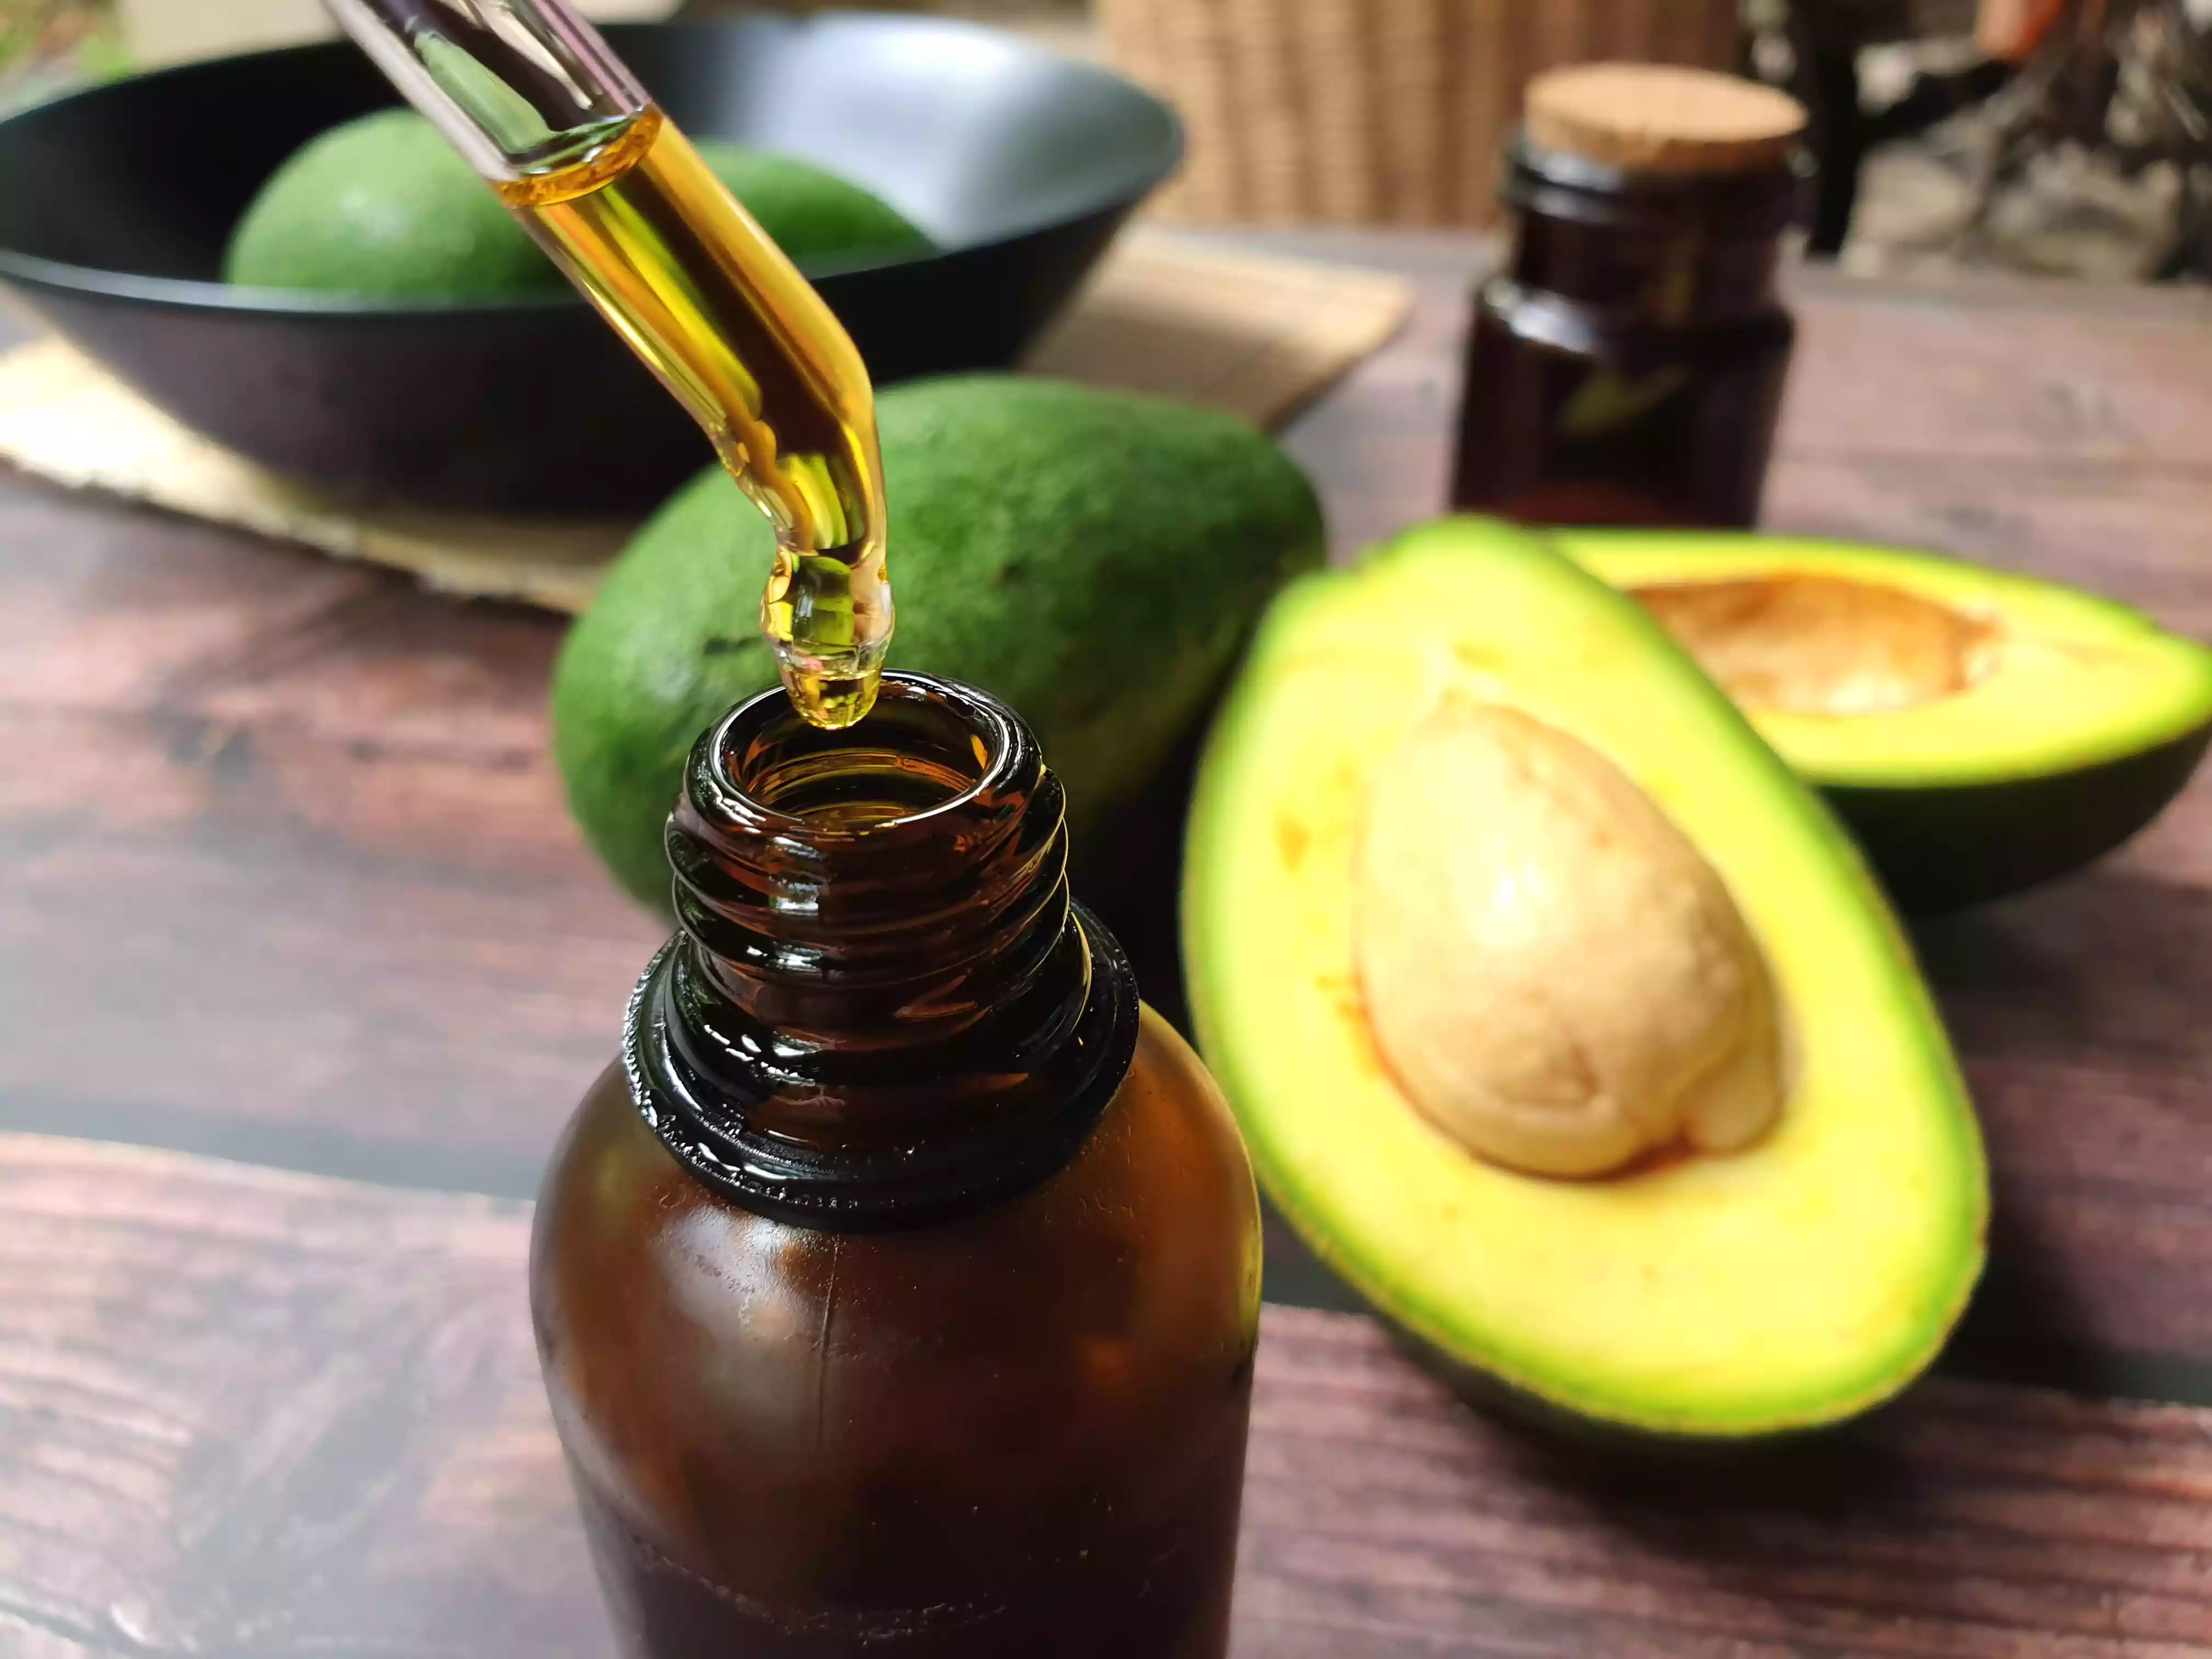 Avocados And Avocado Oil On Wooden Table